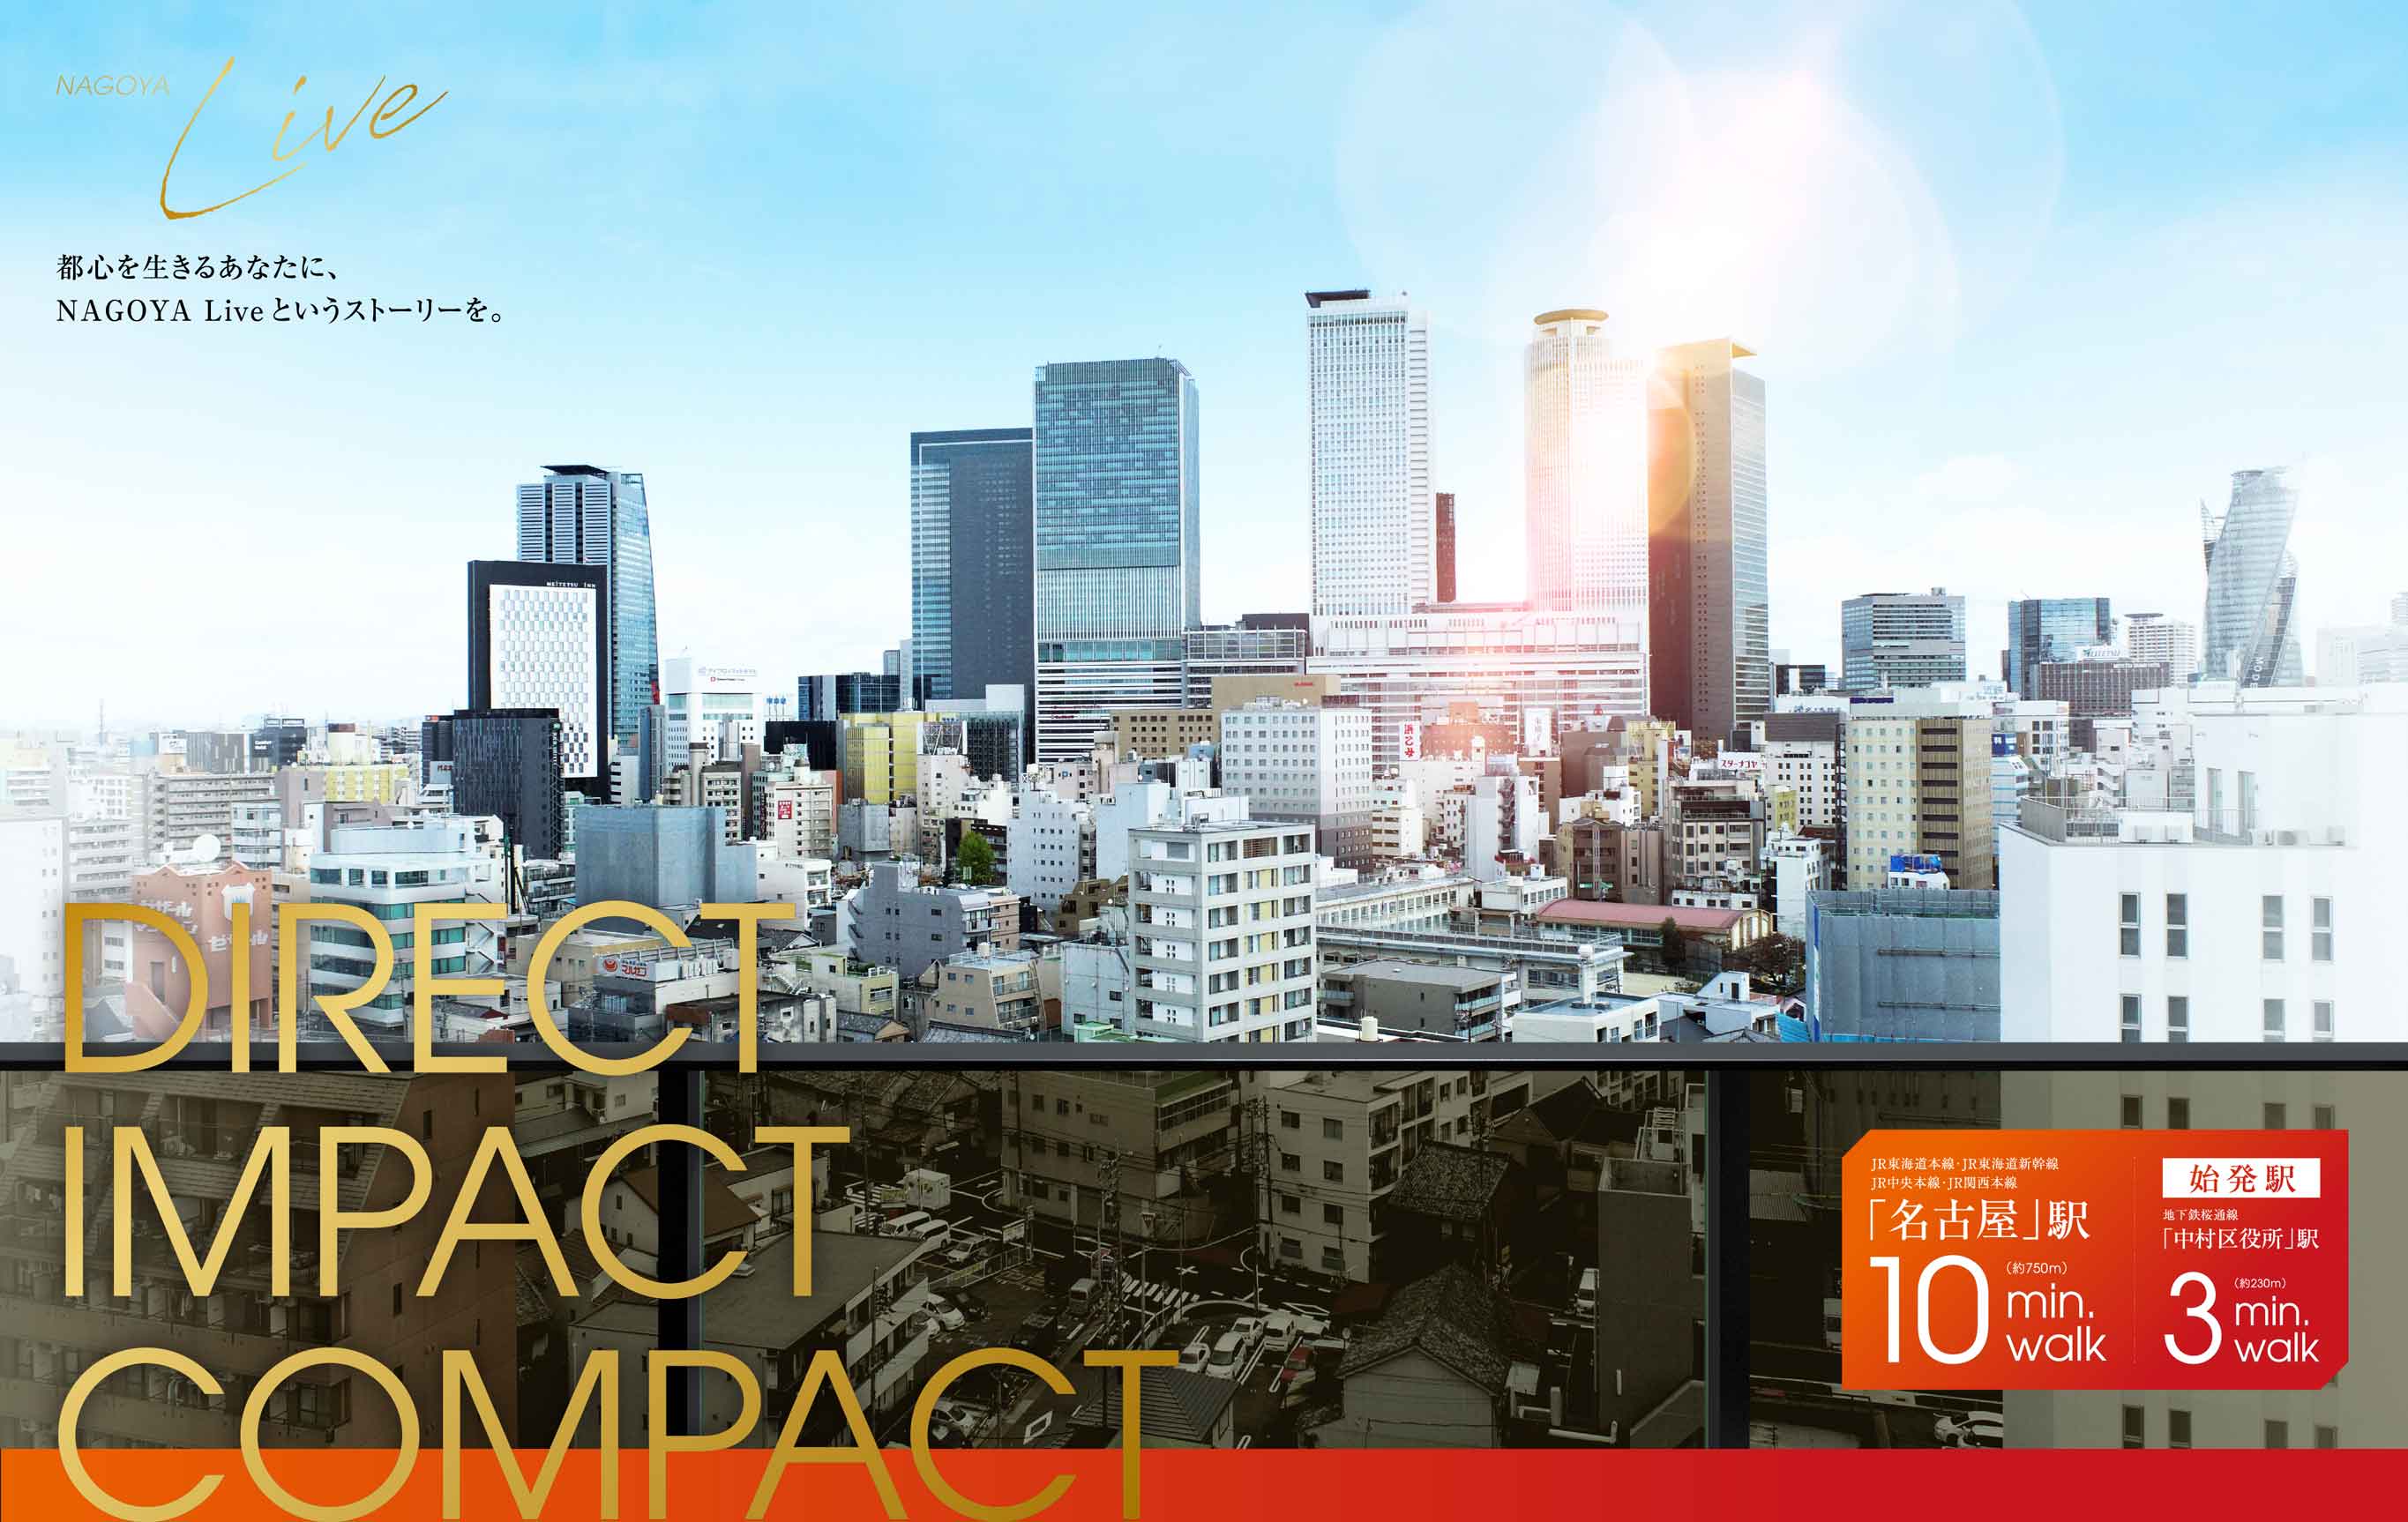 DIRECT,IMPACT,COMPACT